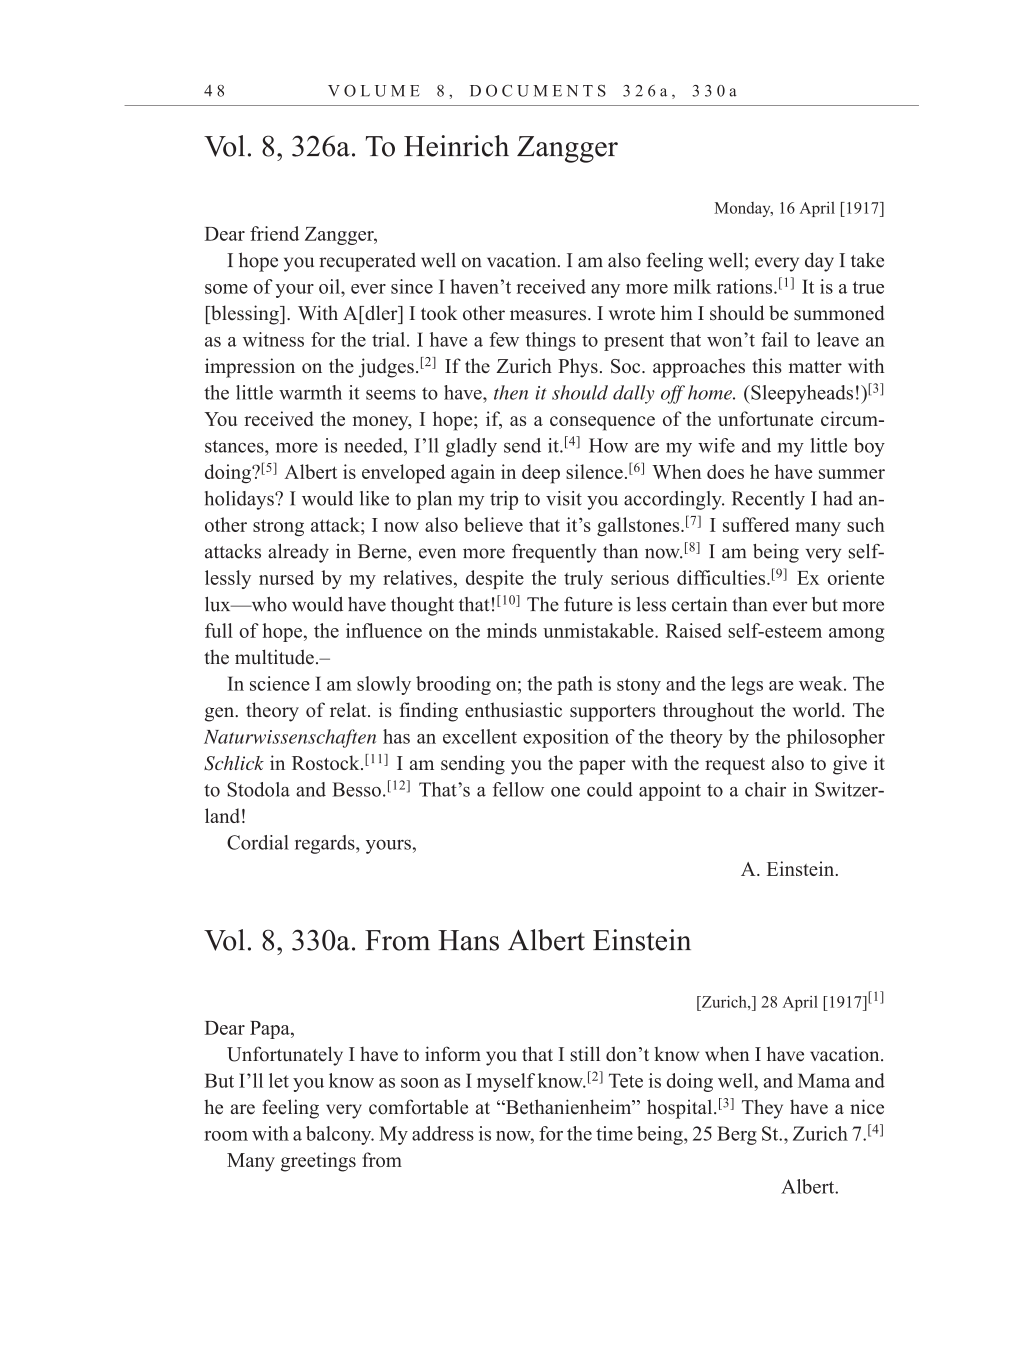 Volume 10: The Berlin Years: Correspondence, May-December 1920, and Supplementary Correspondence, 1909-1920 (English translation supplement) page 48